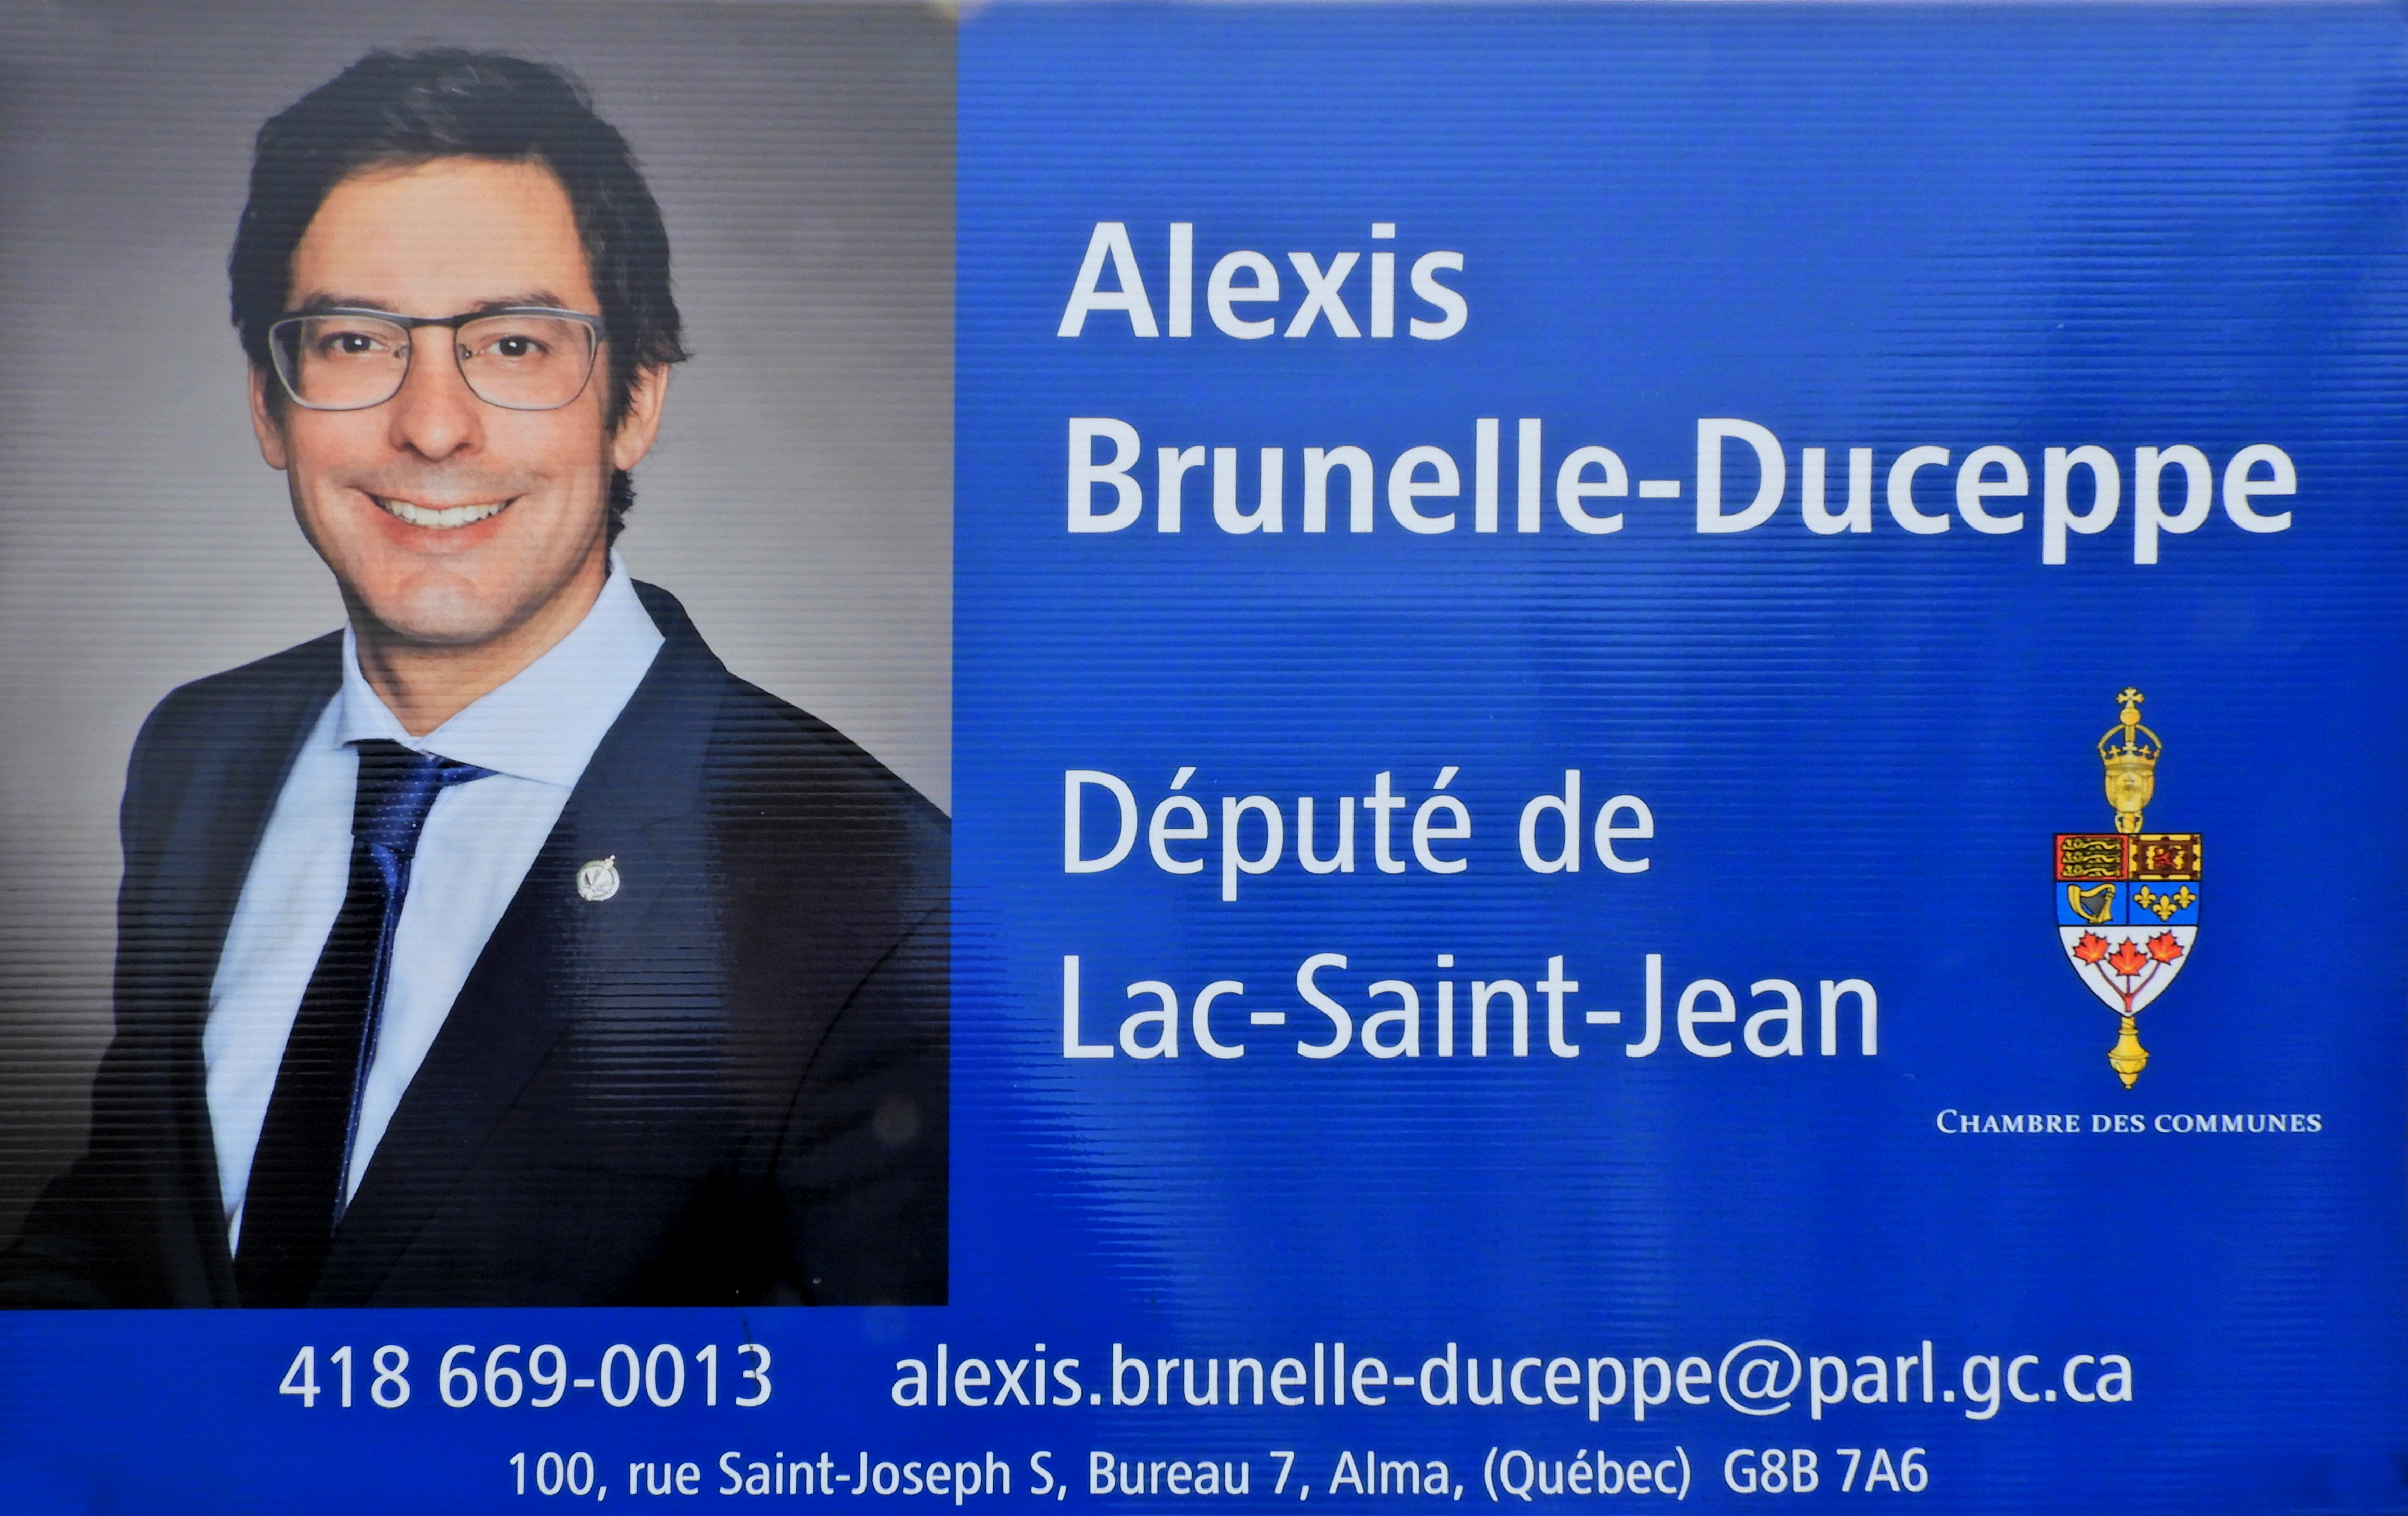 AAlexis Brunelle-Duceppe